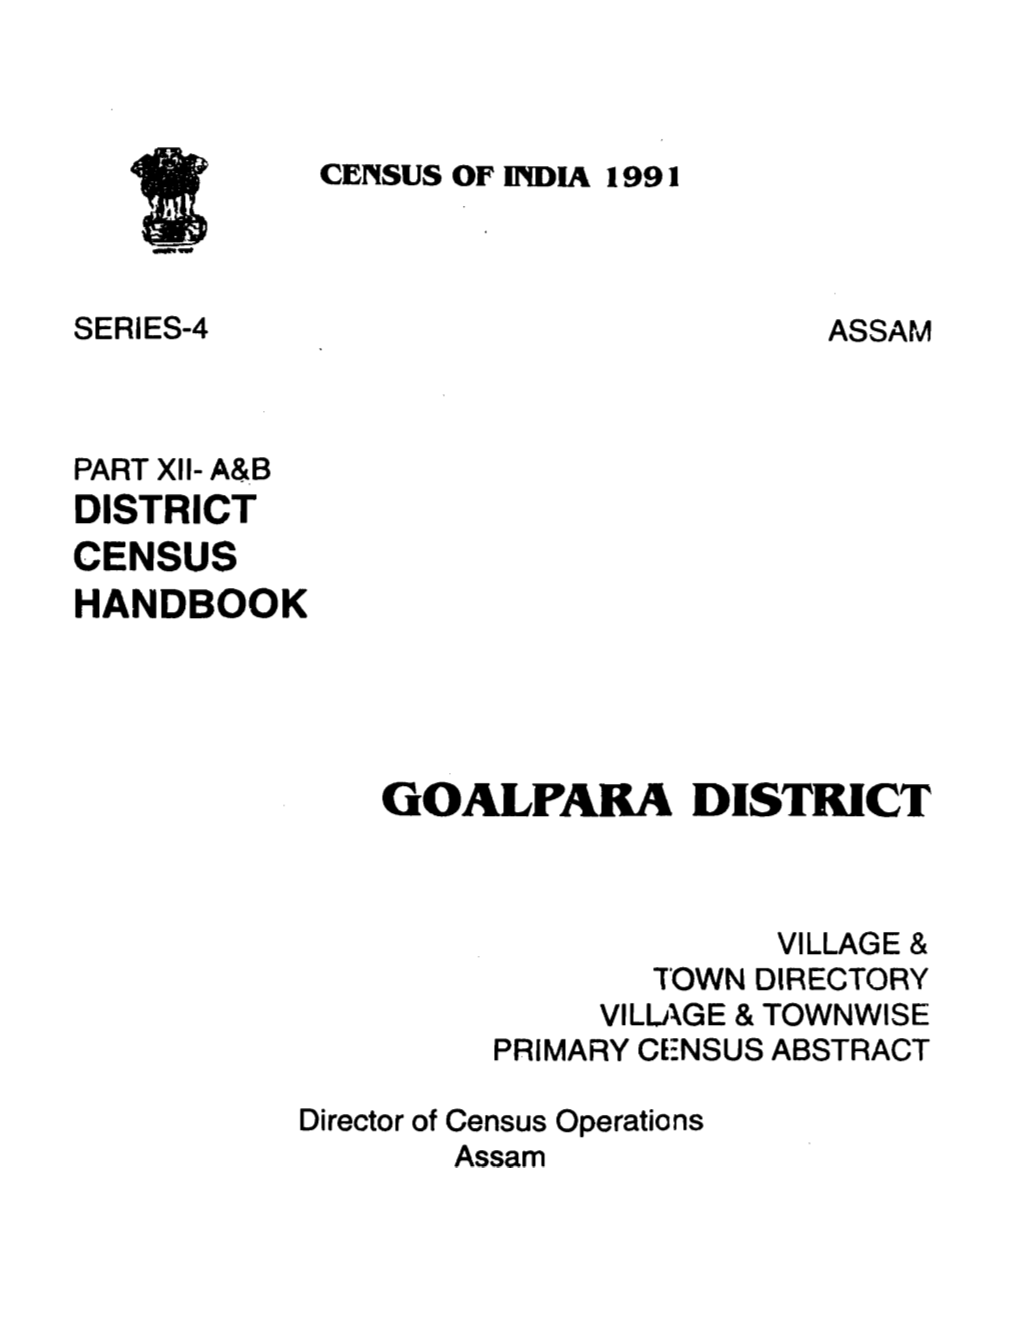 Village & Townwise Primary Census Abstract, Goalpara, Part XII-A&B